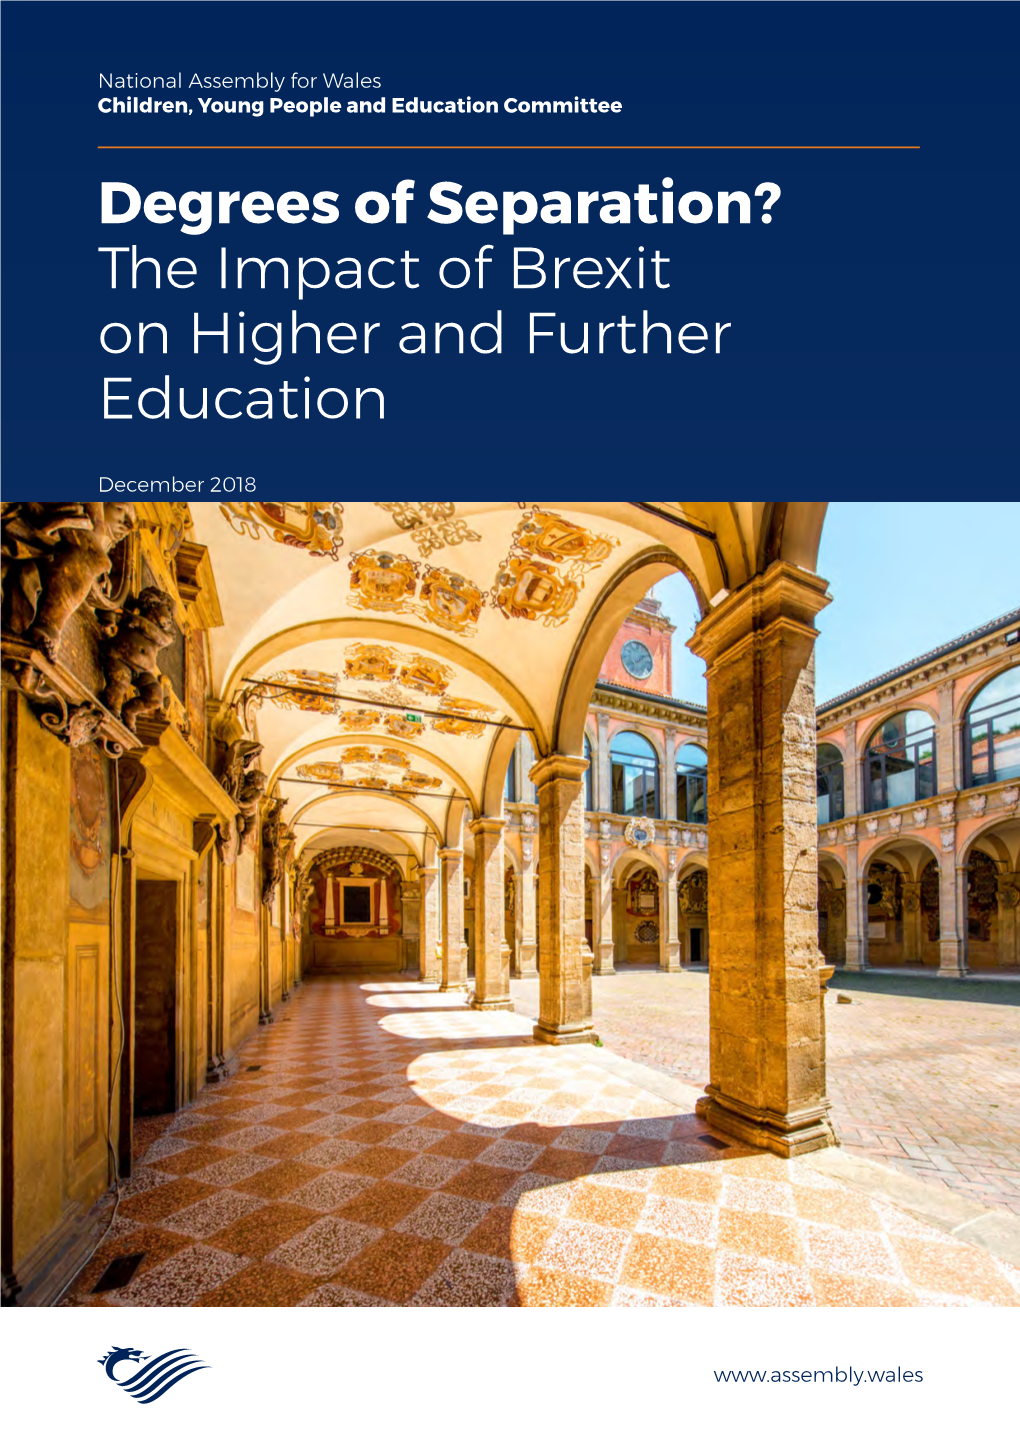 The Impact of Brexit on Higher and Further Education